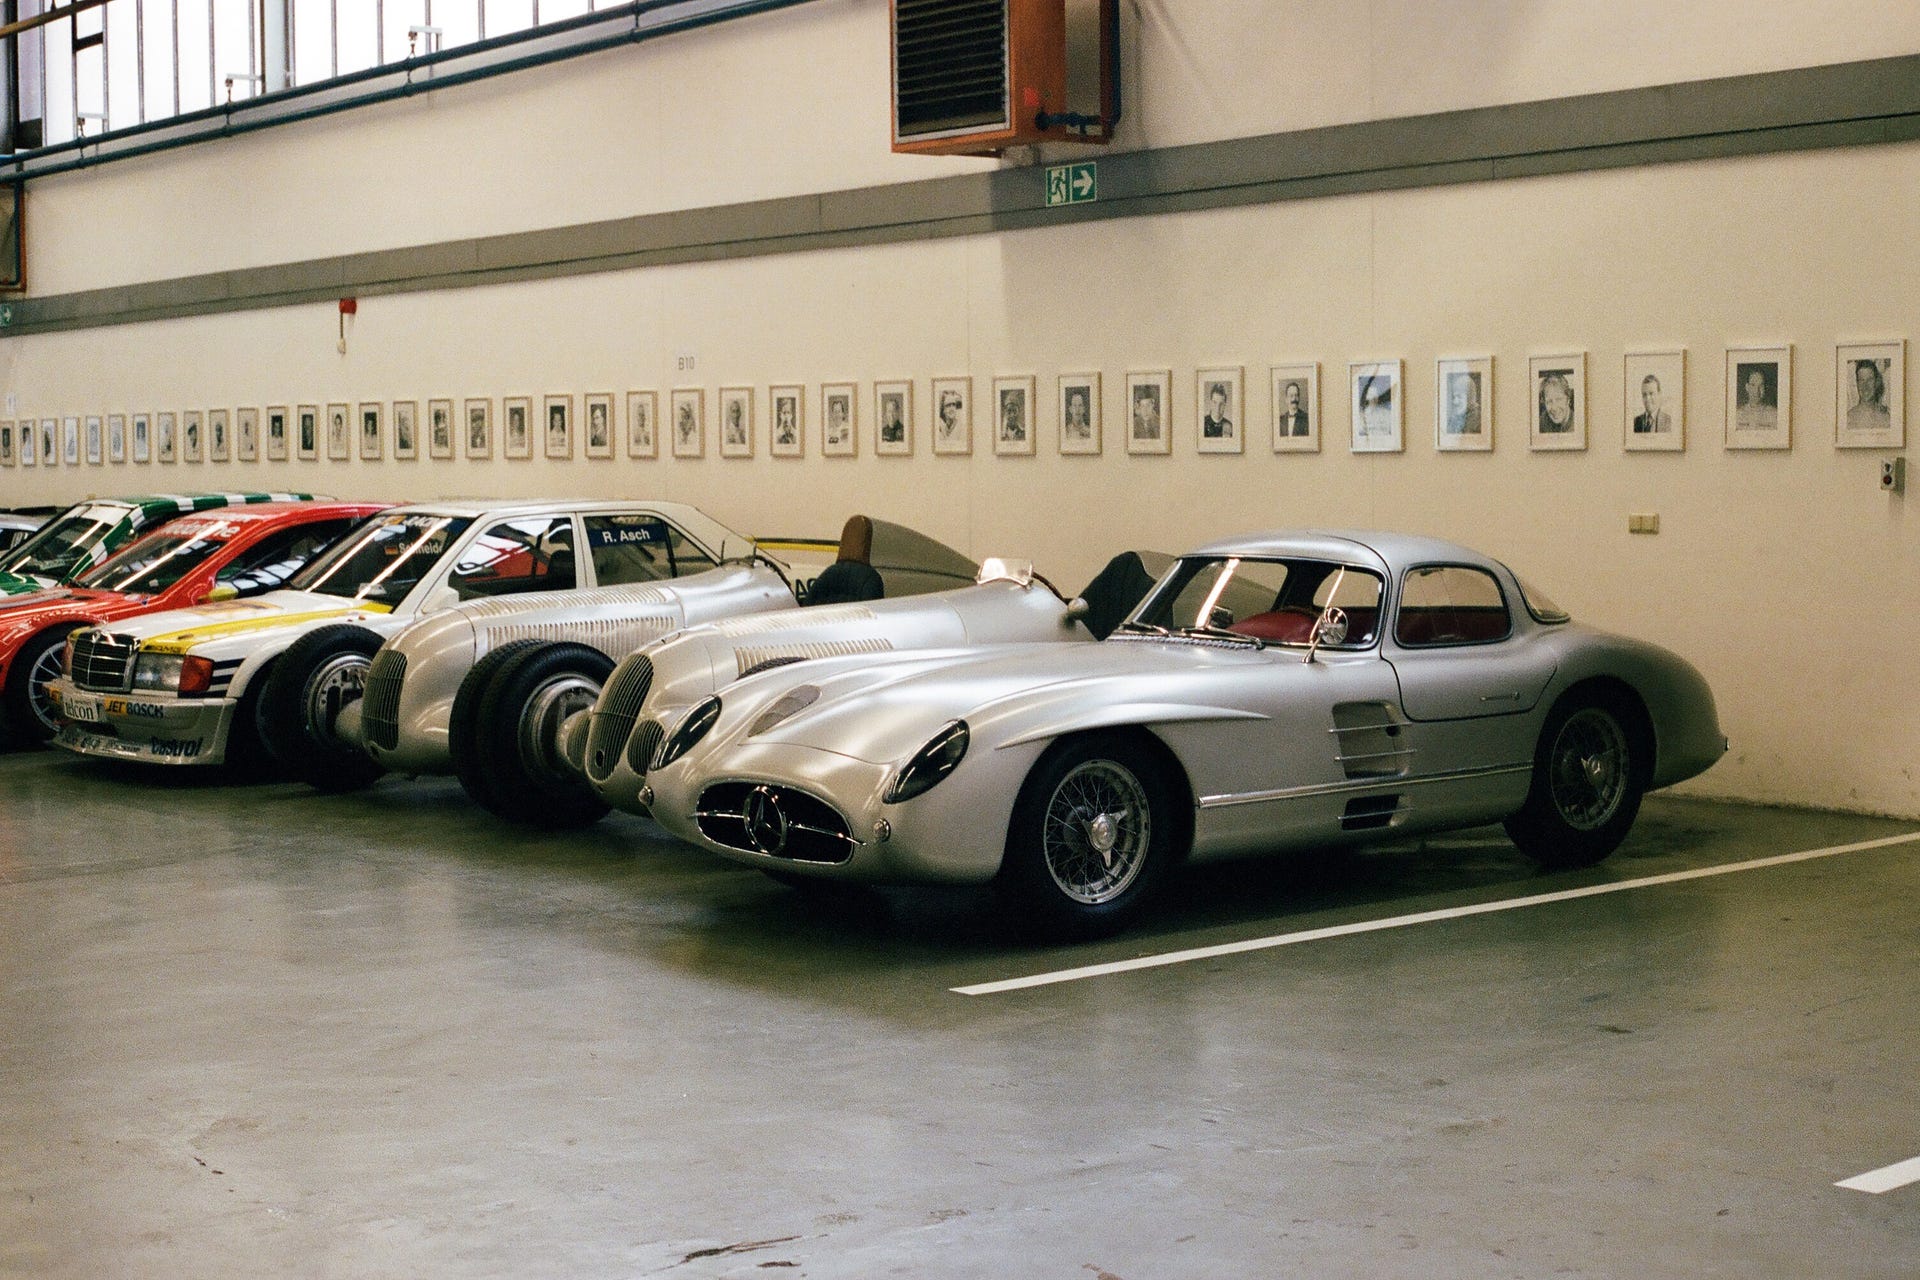 1955 Mercedes-Benz 300SLR Uhlenhaut Coupe parked indoors in a row of cars